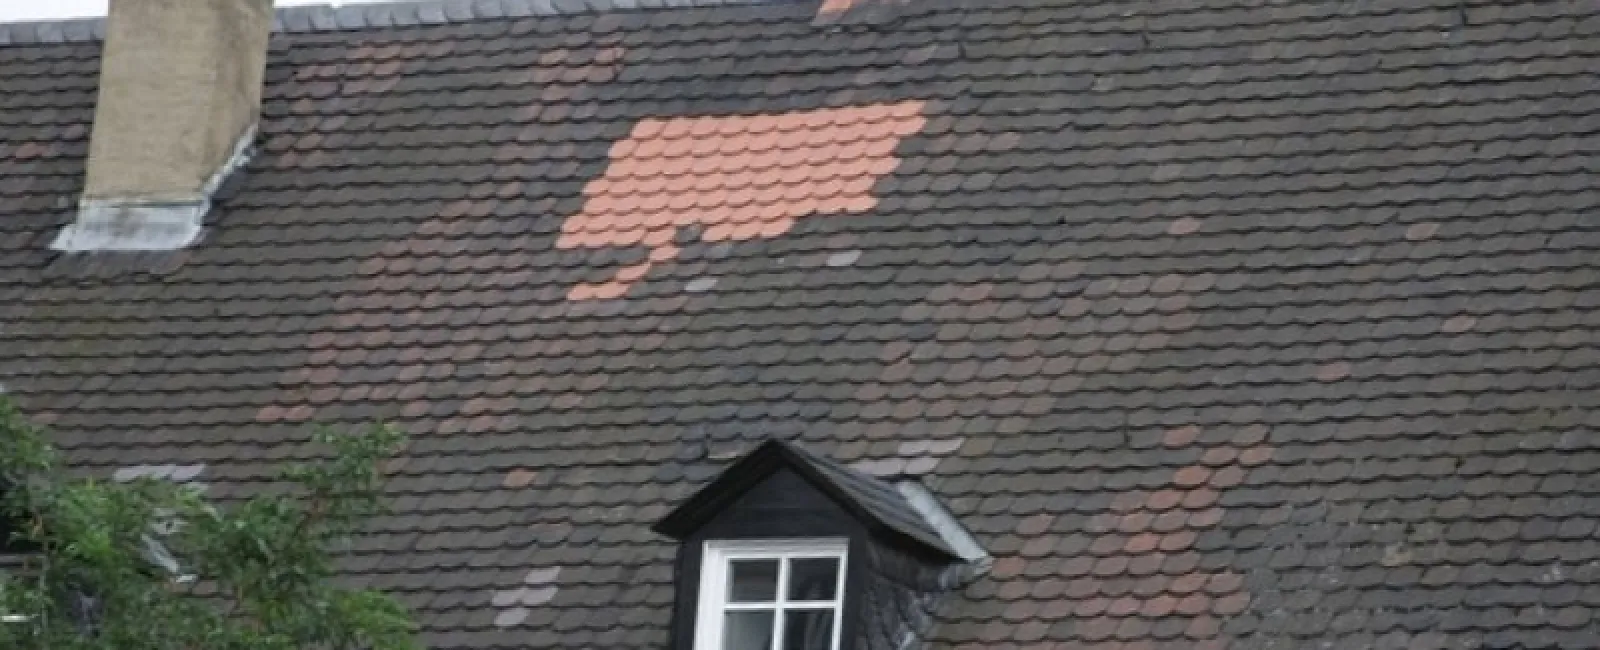 How to fix a roof patch with a professional touch